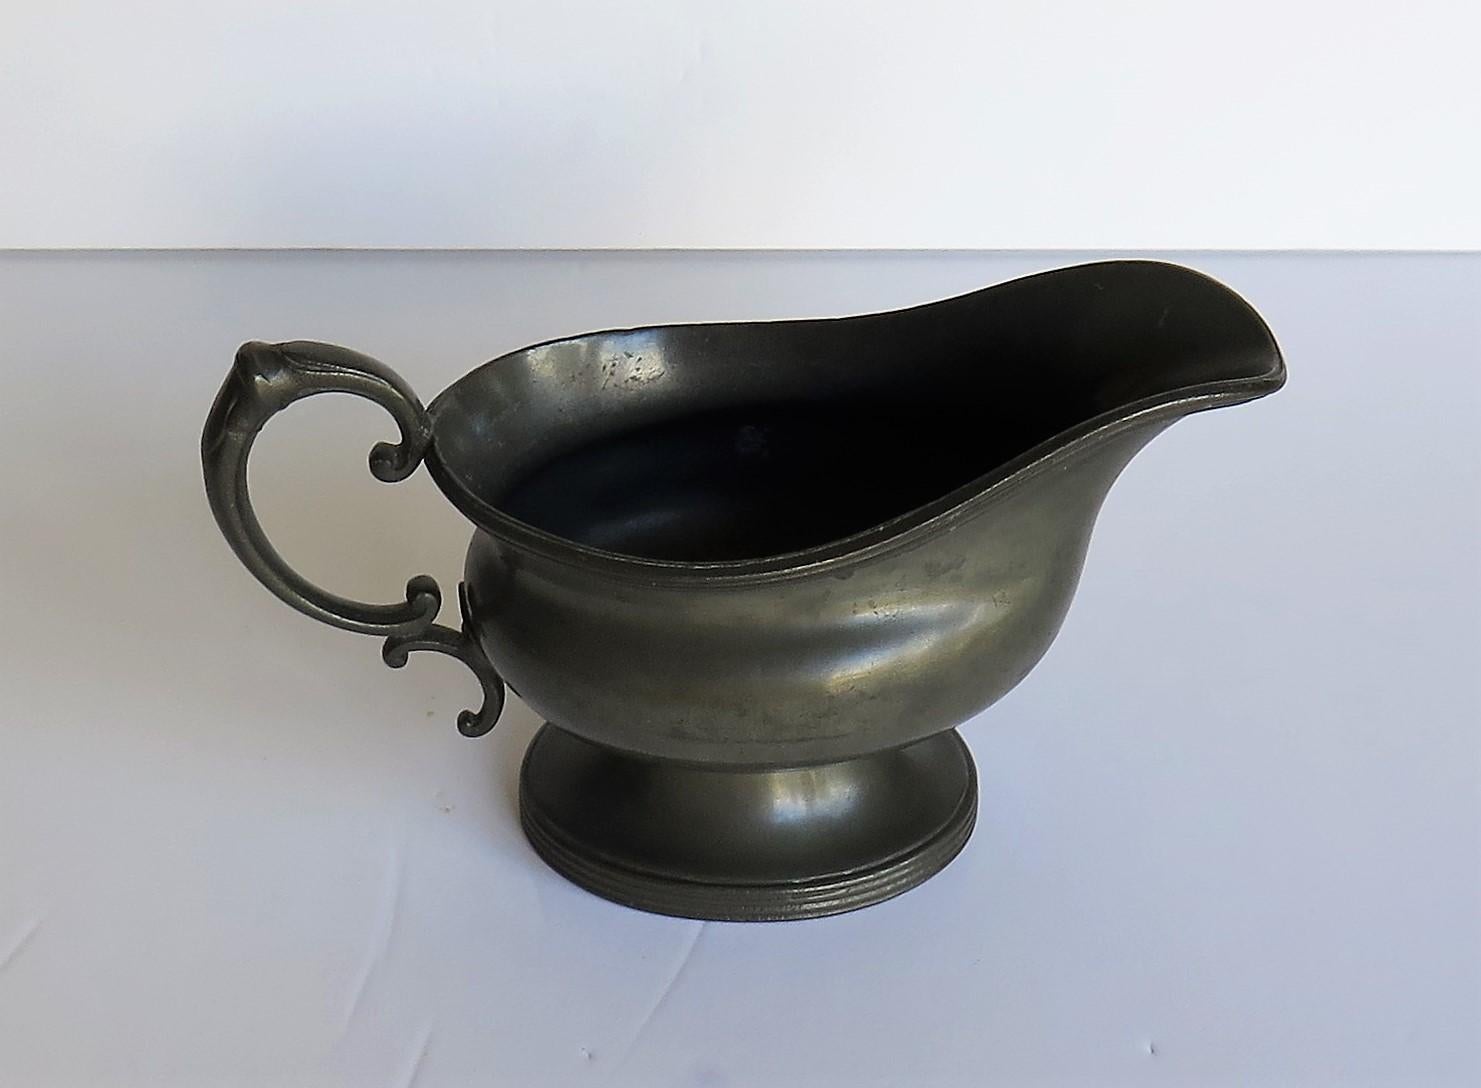 This is a good late 19th century pewter sauce or gravy boat with good reeded detail made by Walker & Hall of Sheffield, England with a full set of stamped marks to the base for the period.

This sauce boat has a lovely rounded body with a single